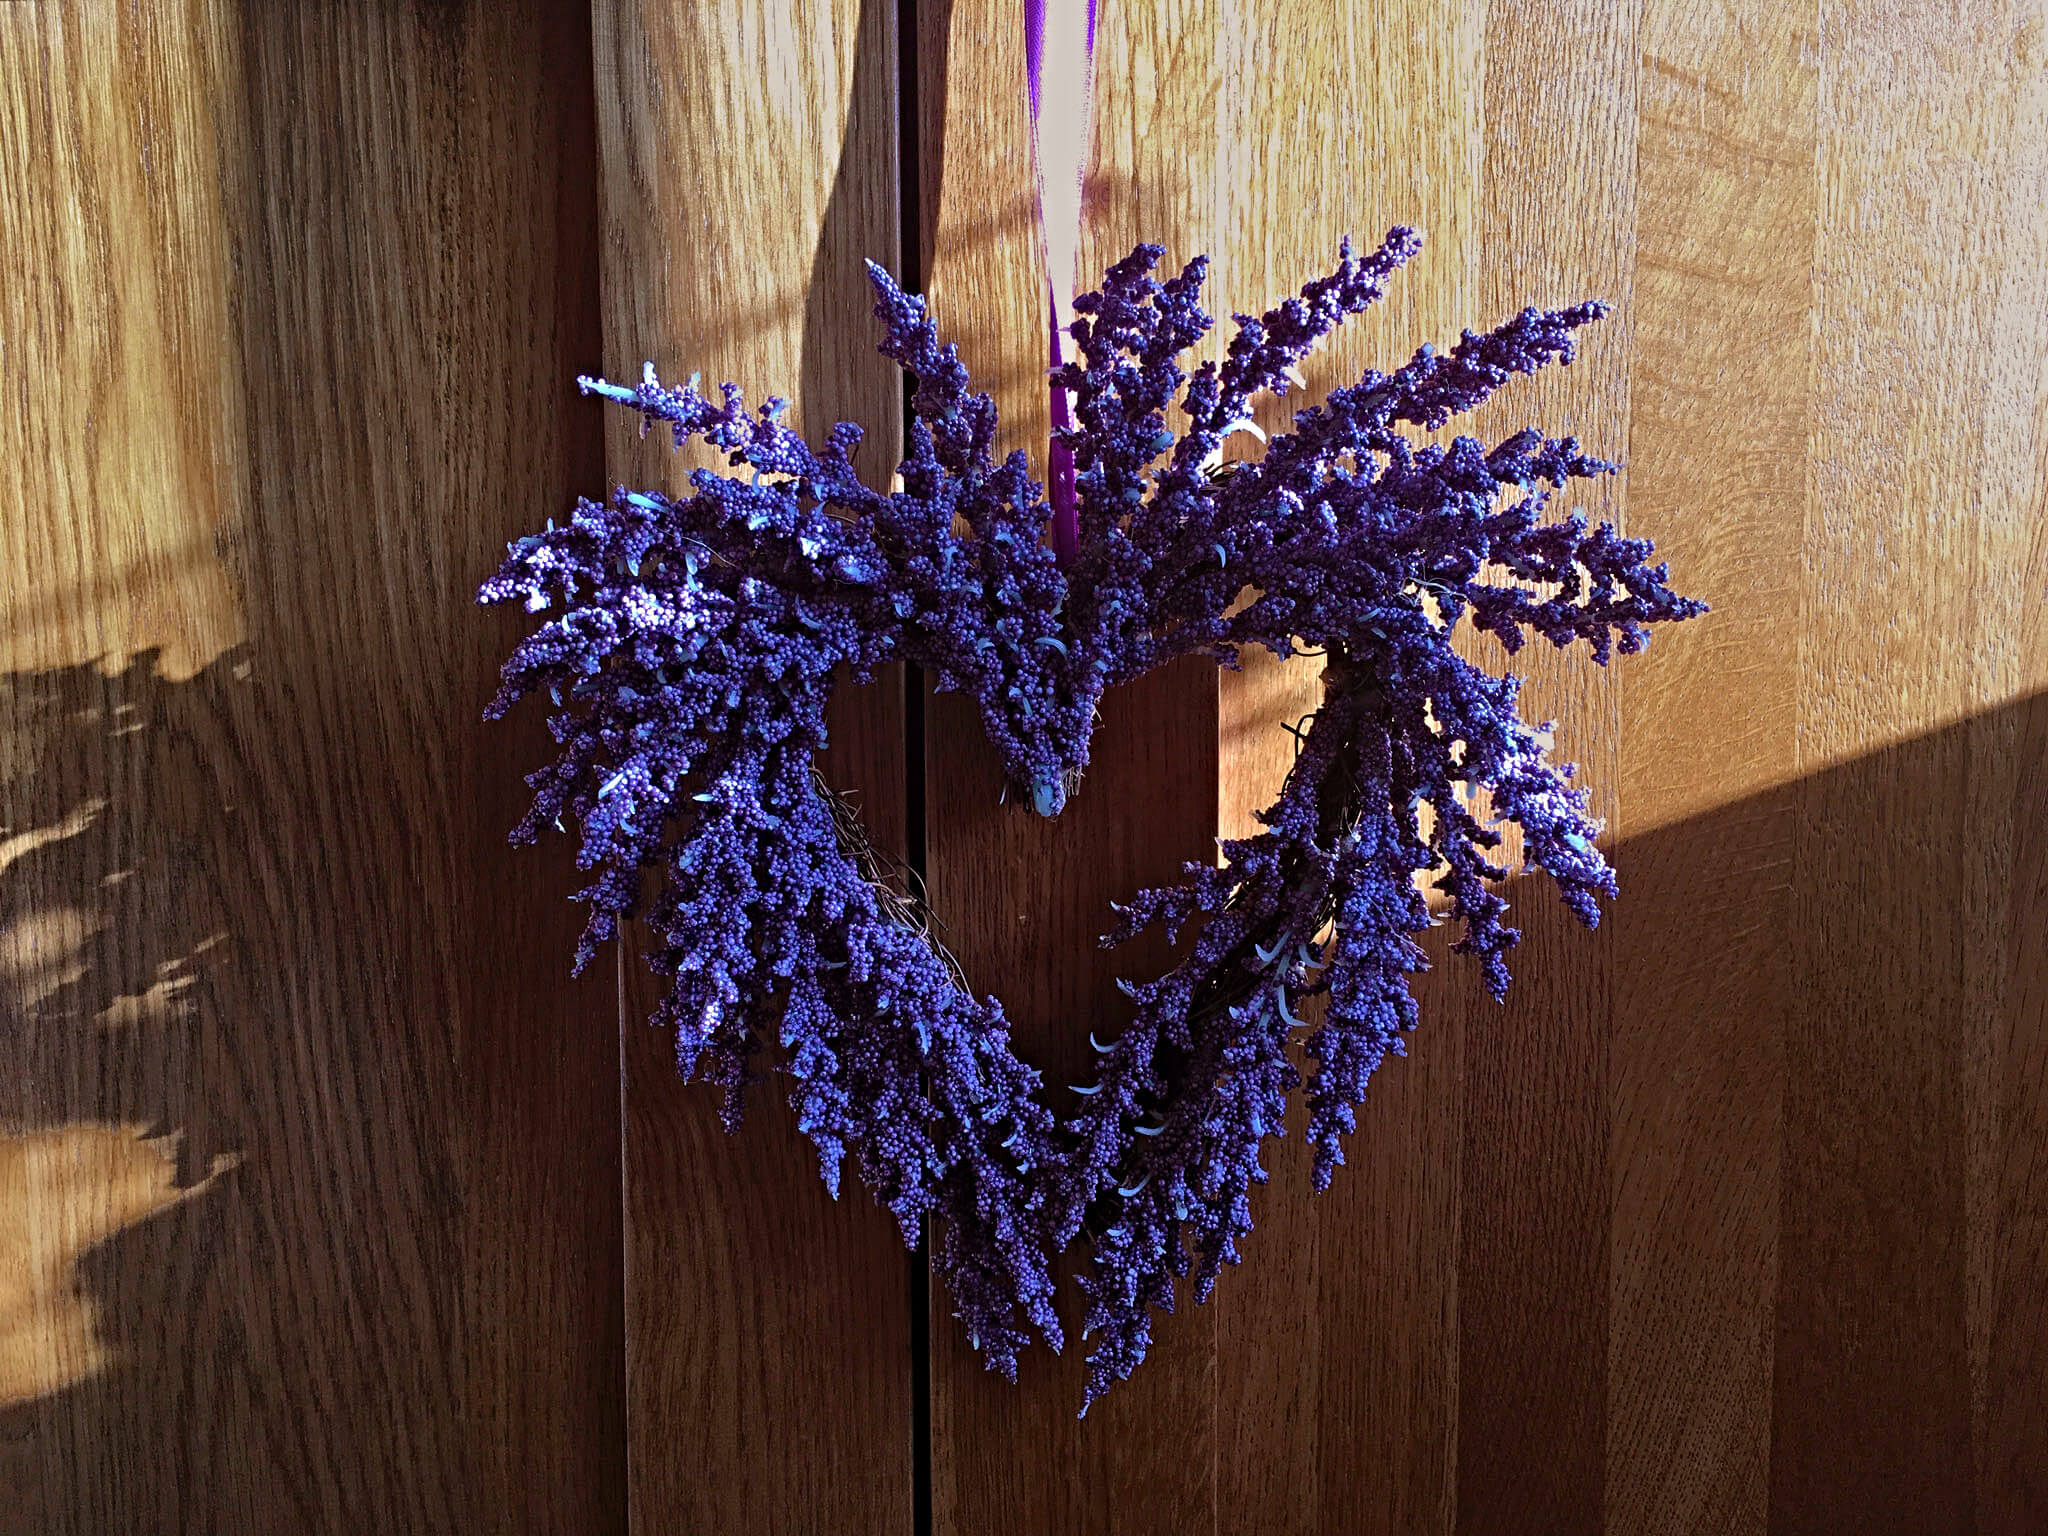 Lavender Heart - About us page